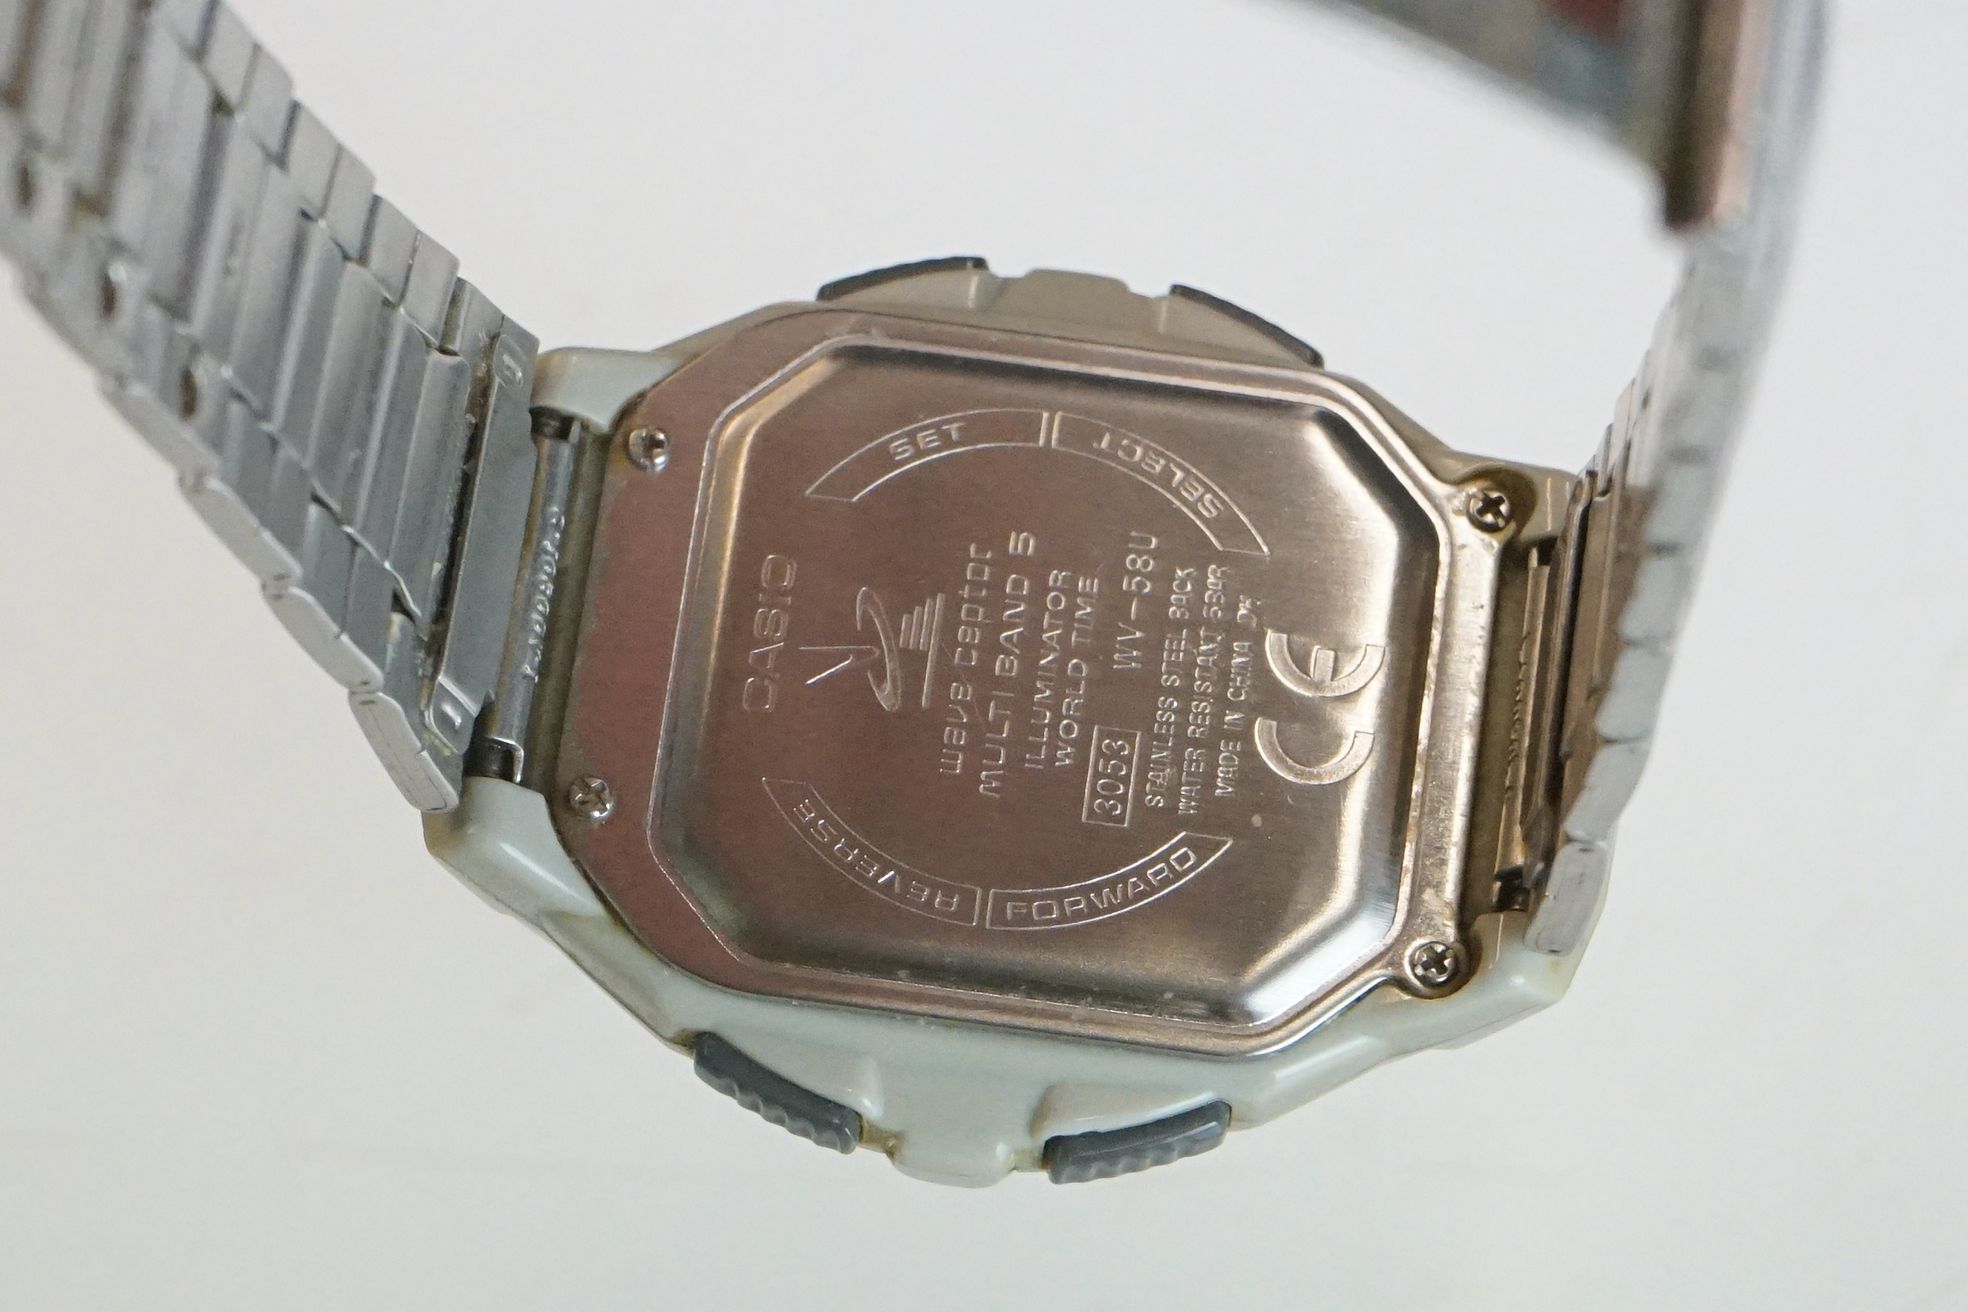 Collection of LCD Watches including Seiko, Casio, Lambda, etc - Image 14 of 14